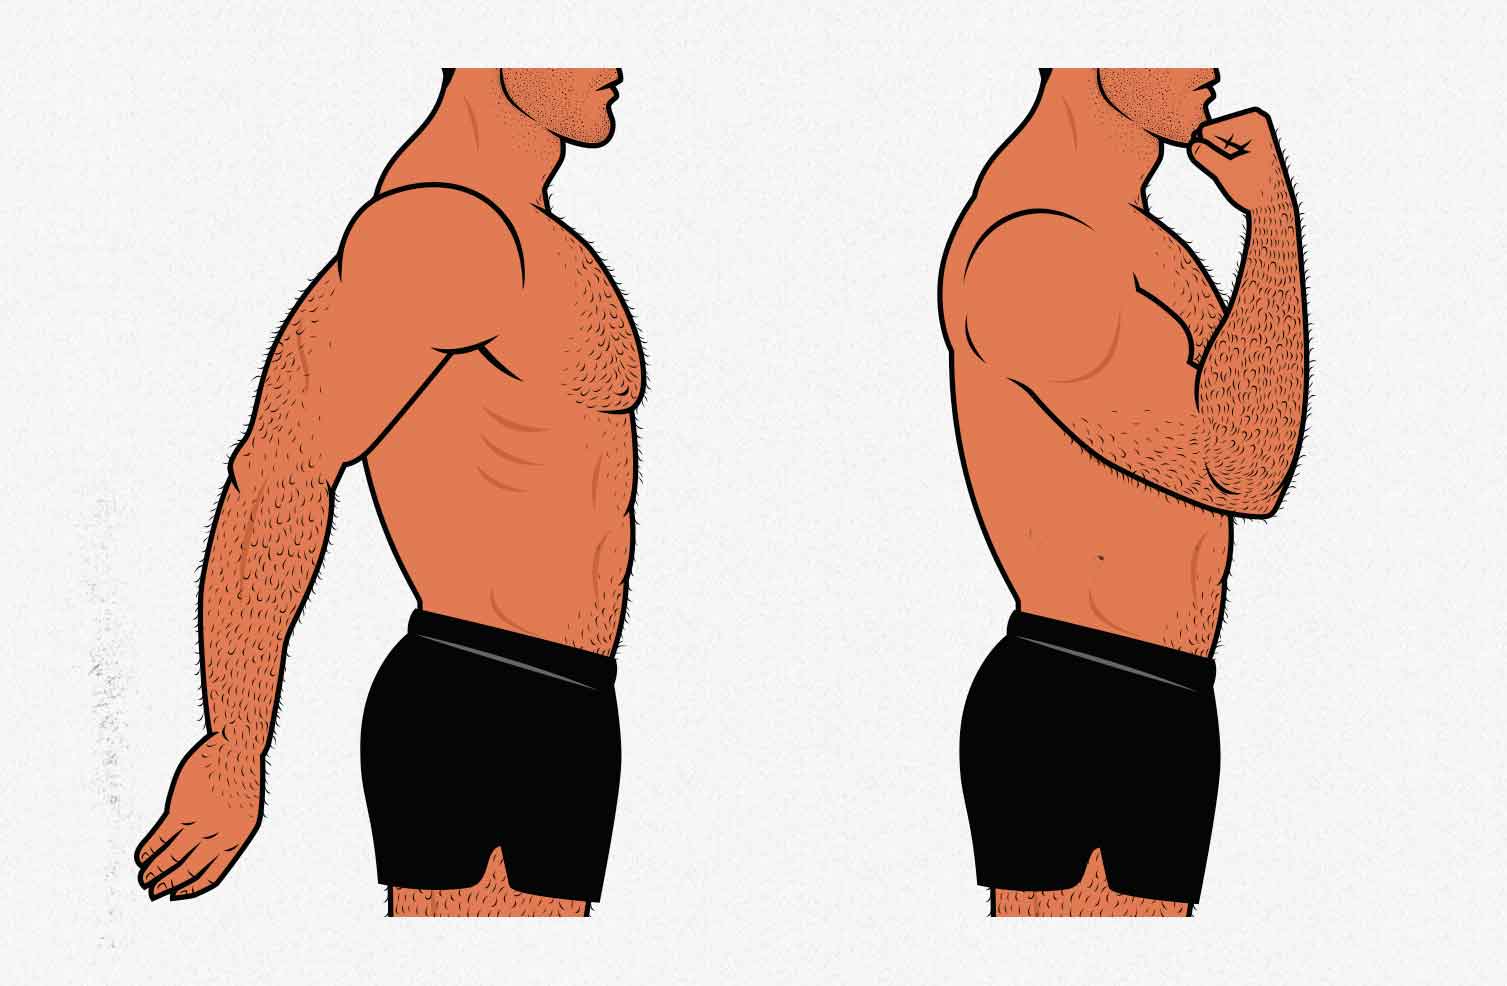 Illustration showing the range of motion of our biceps.